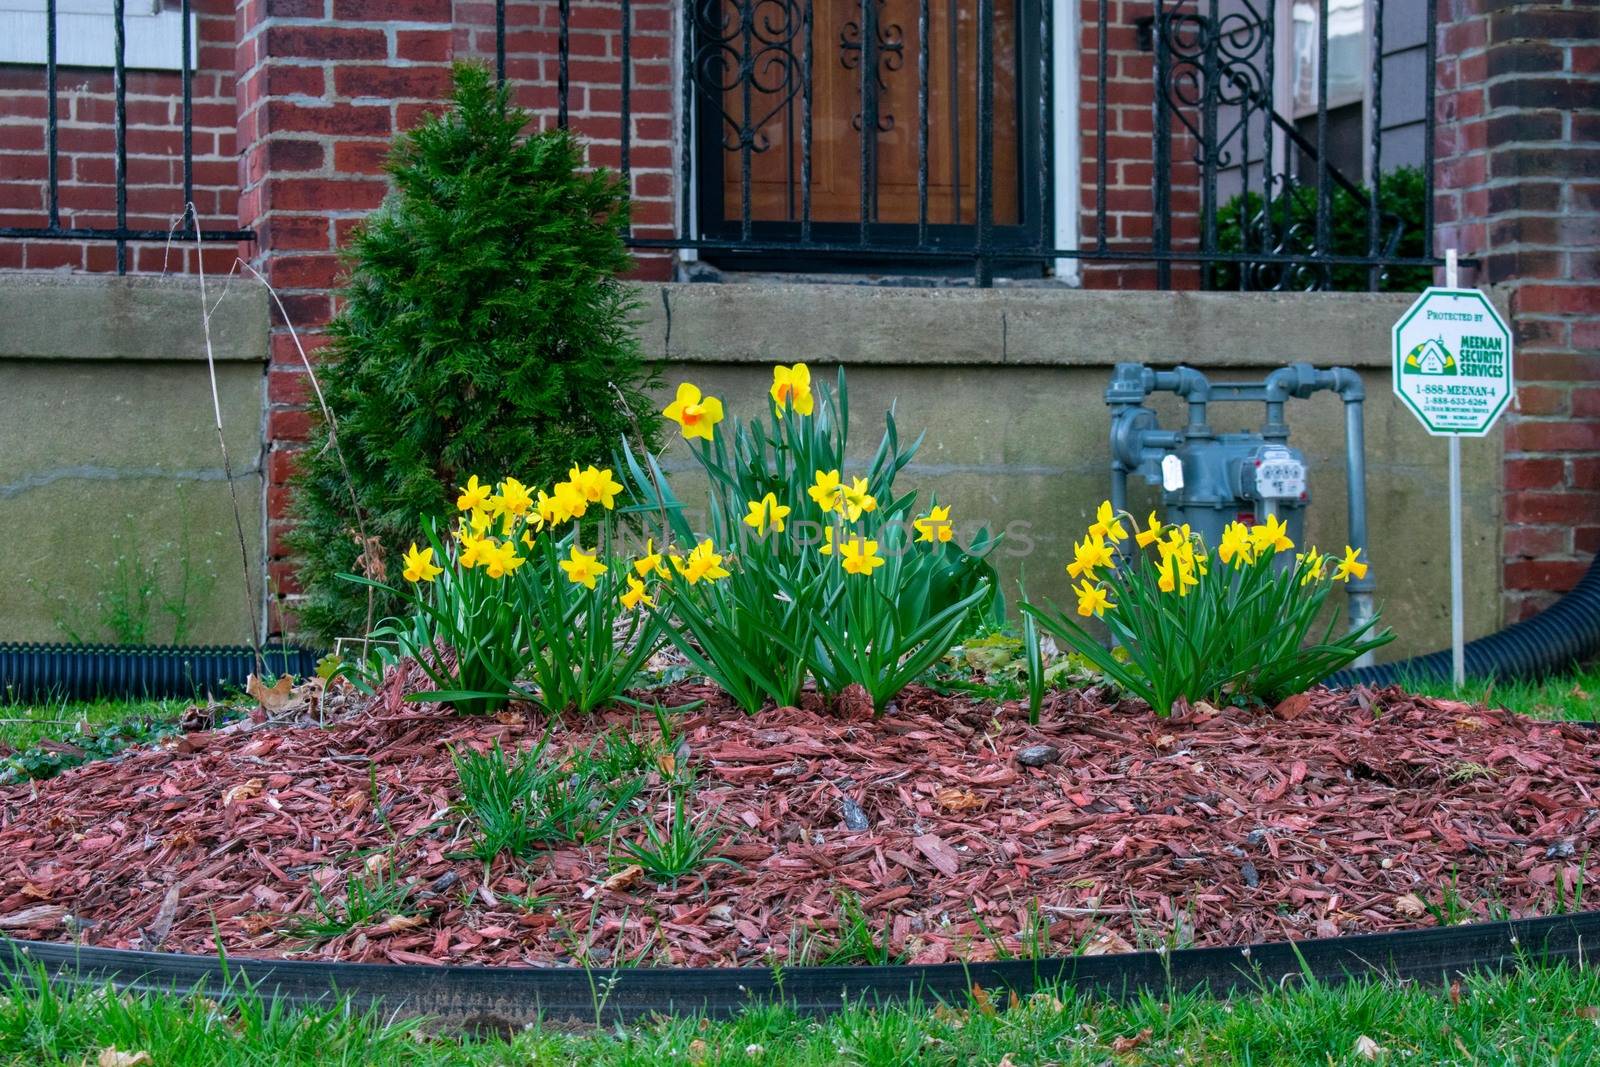 A Garden In a Front Yard in Suburban Pennyslvania With Yellow Fl by bju12290